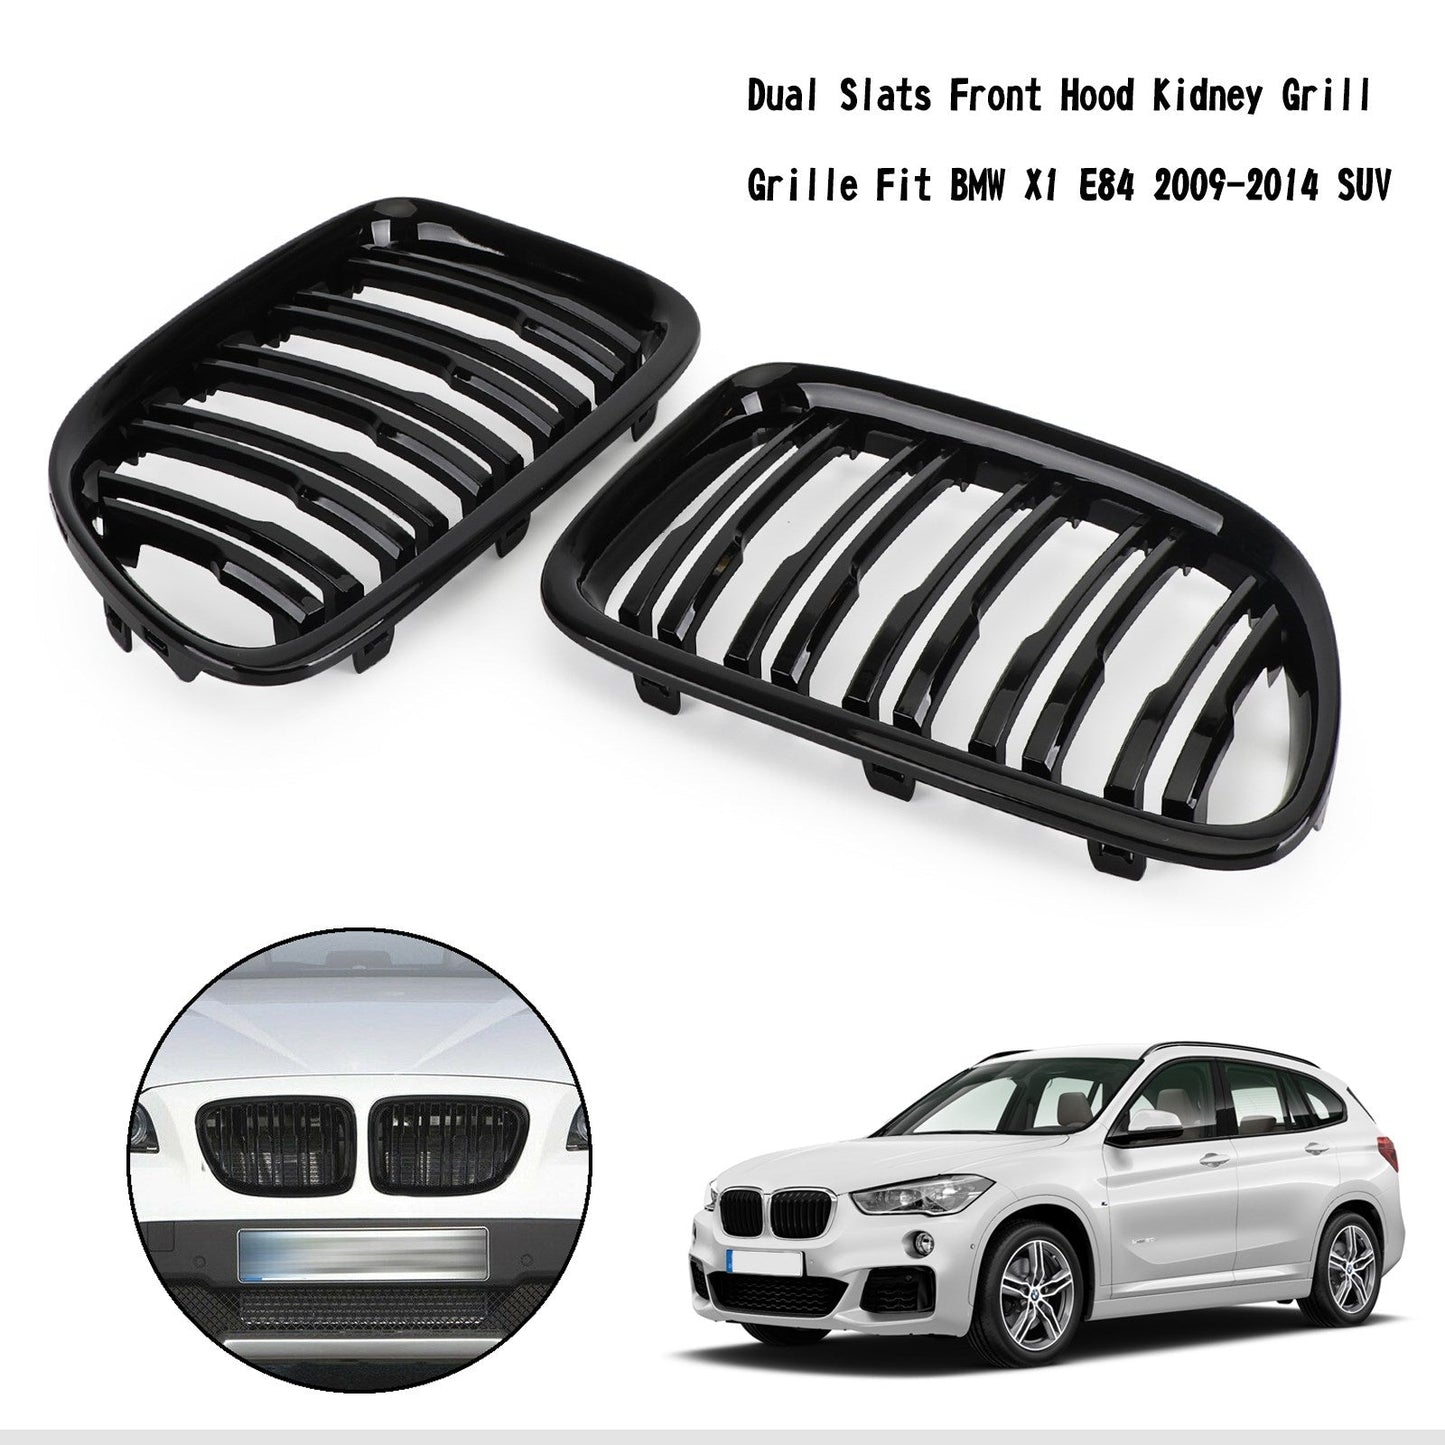 2009-2014 BMW X1 E84 Gloss Black Dual Slats Front Hood Kidney Grill Grille